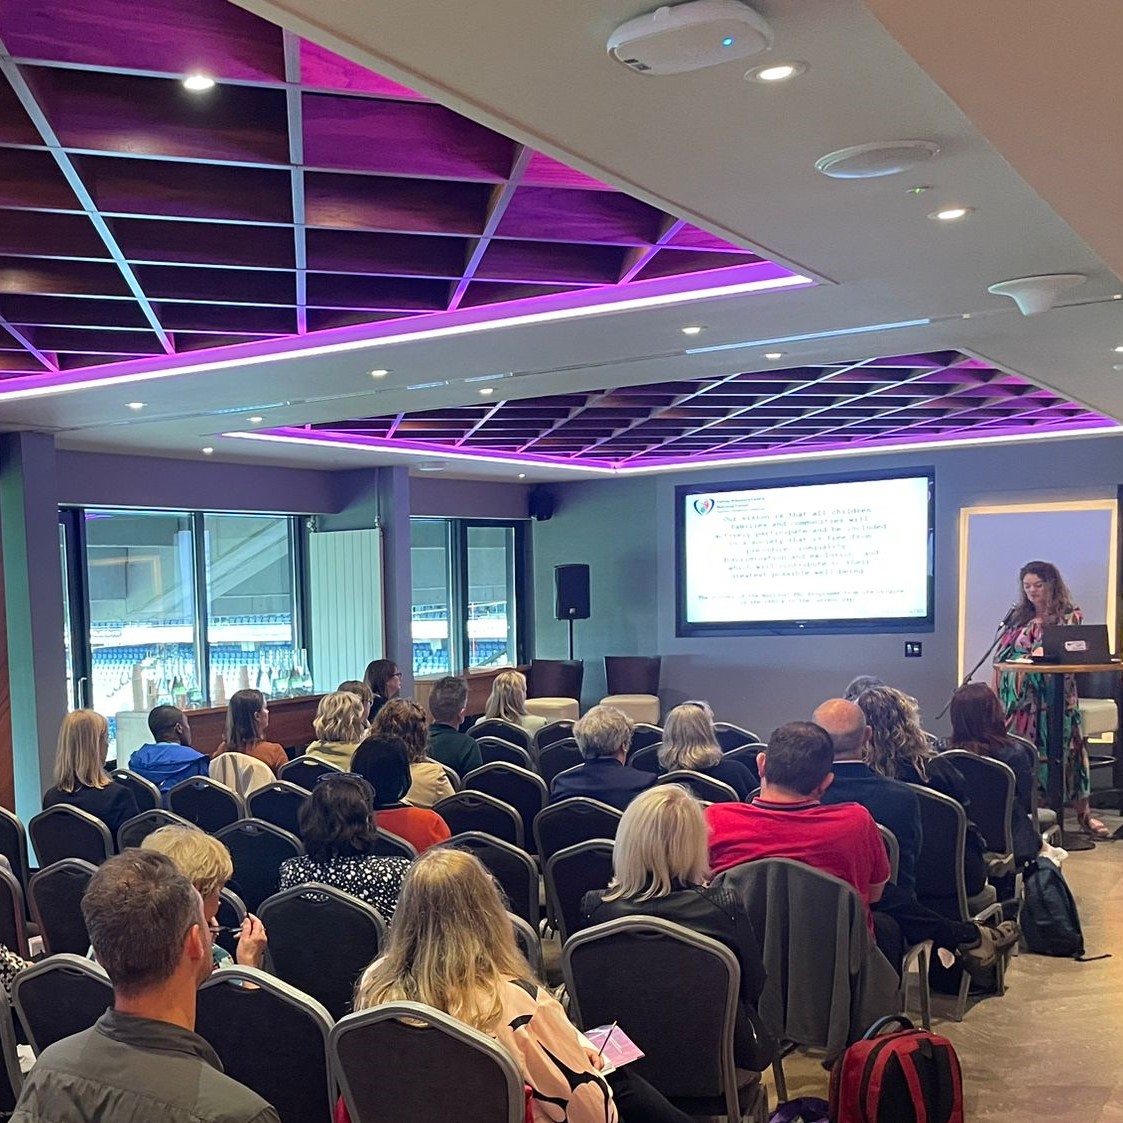 Stellar engagement from inside the session on 'Exploring Family Resource Centres as a Model for Place Based Systems Change' with Ellen Duggan, Shauna Diamond, Kevina Maddick, and Grace Kearney of the @frcnf . #charitysummit